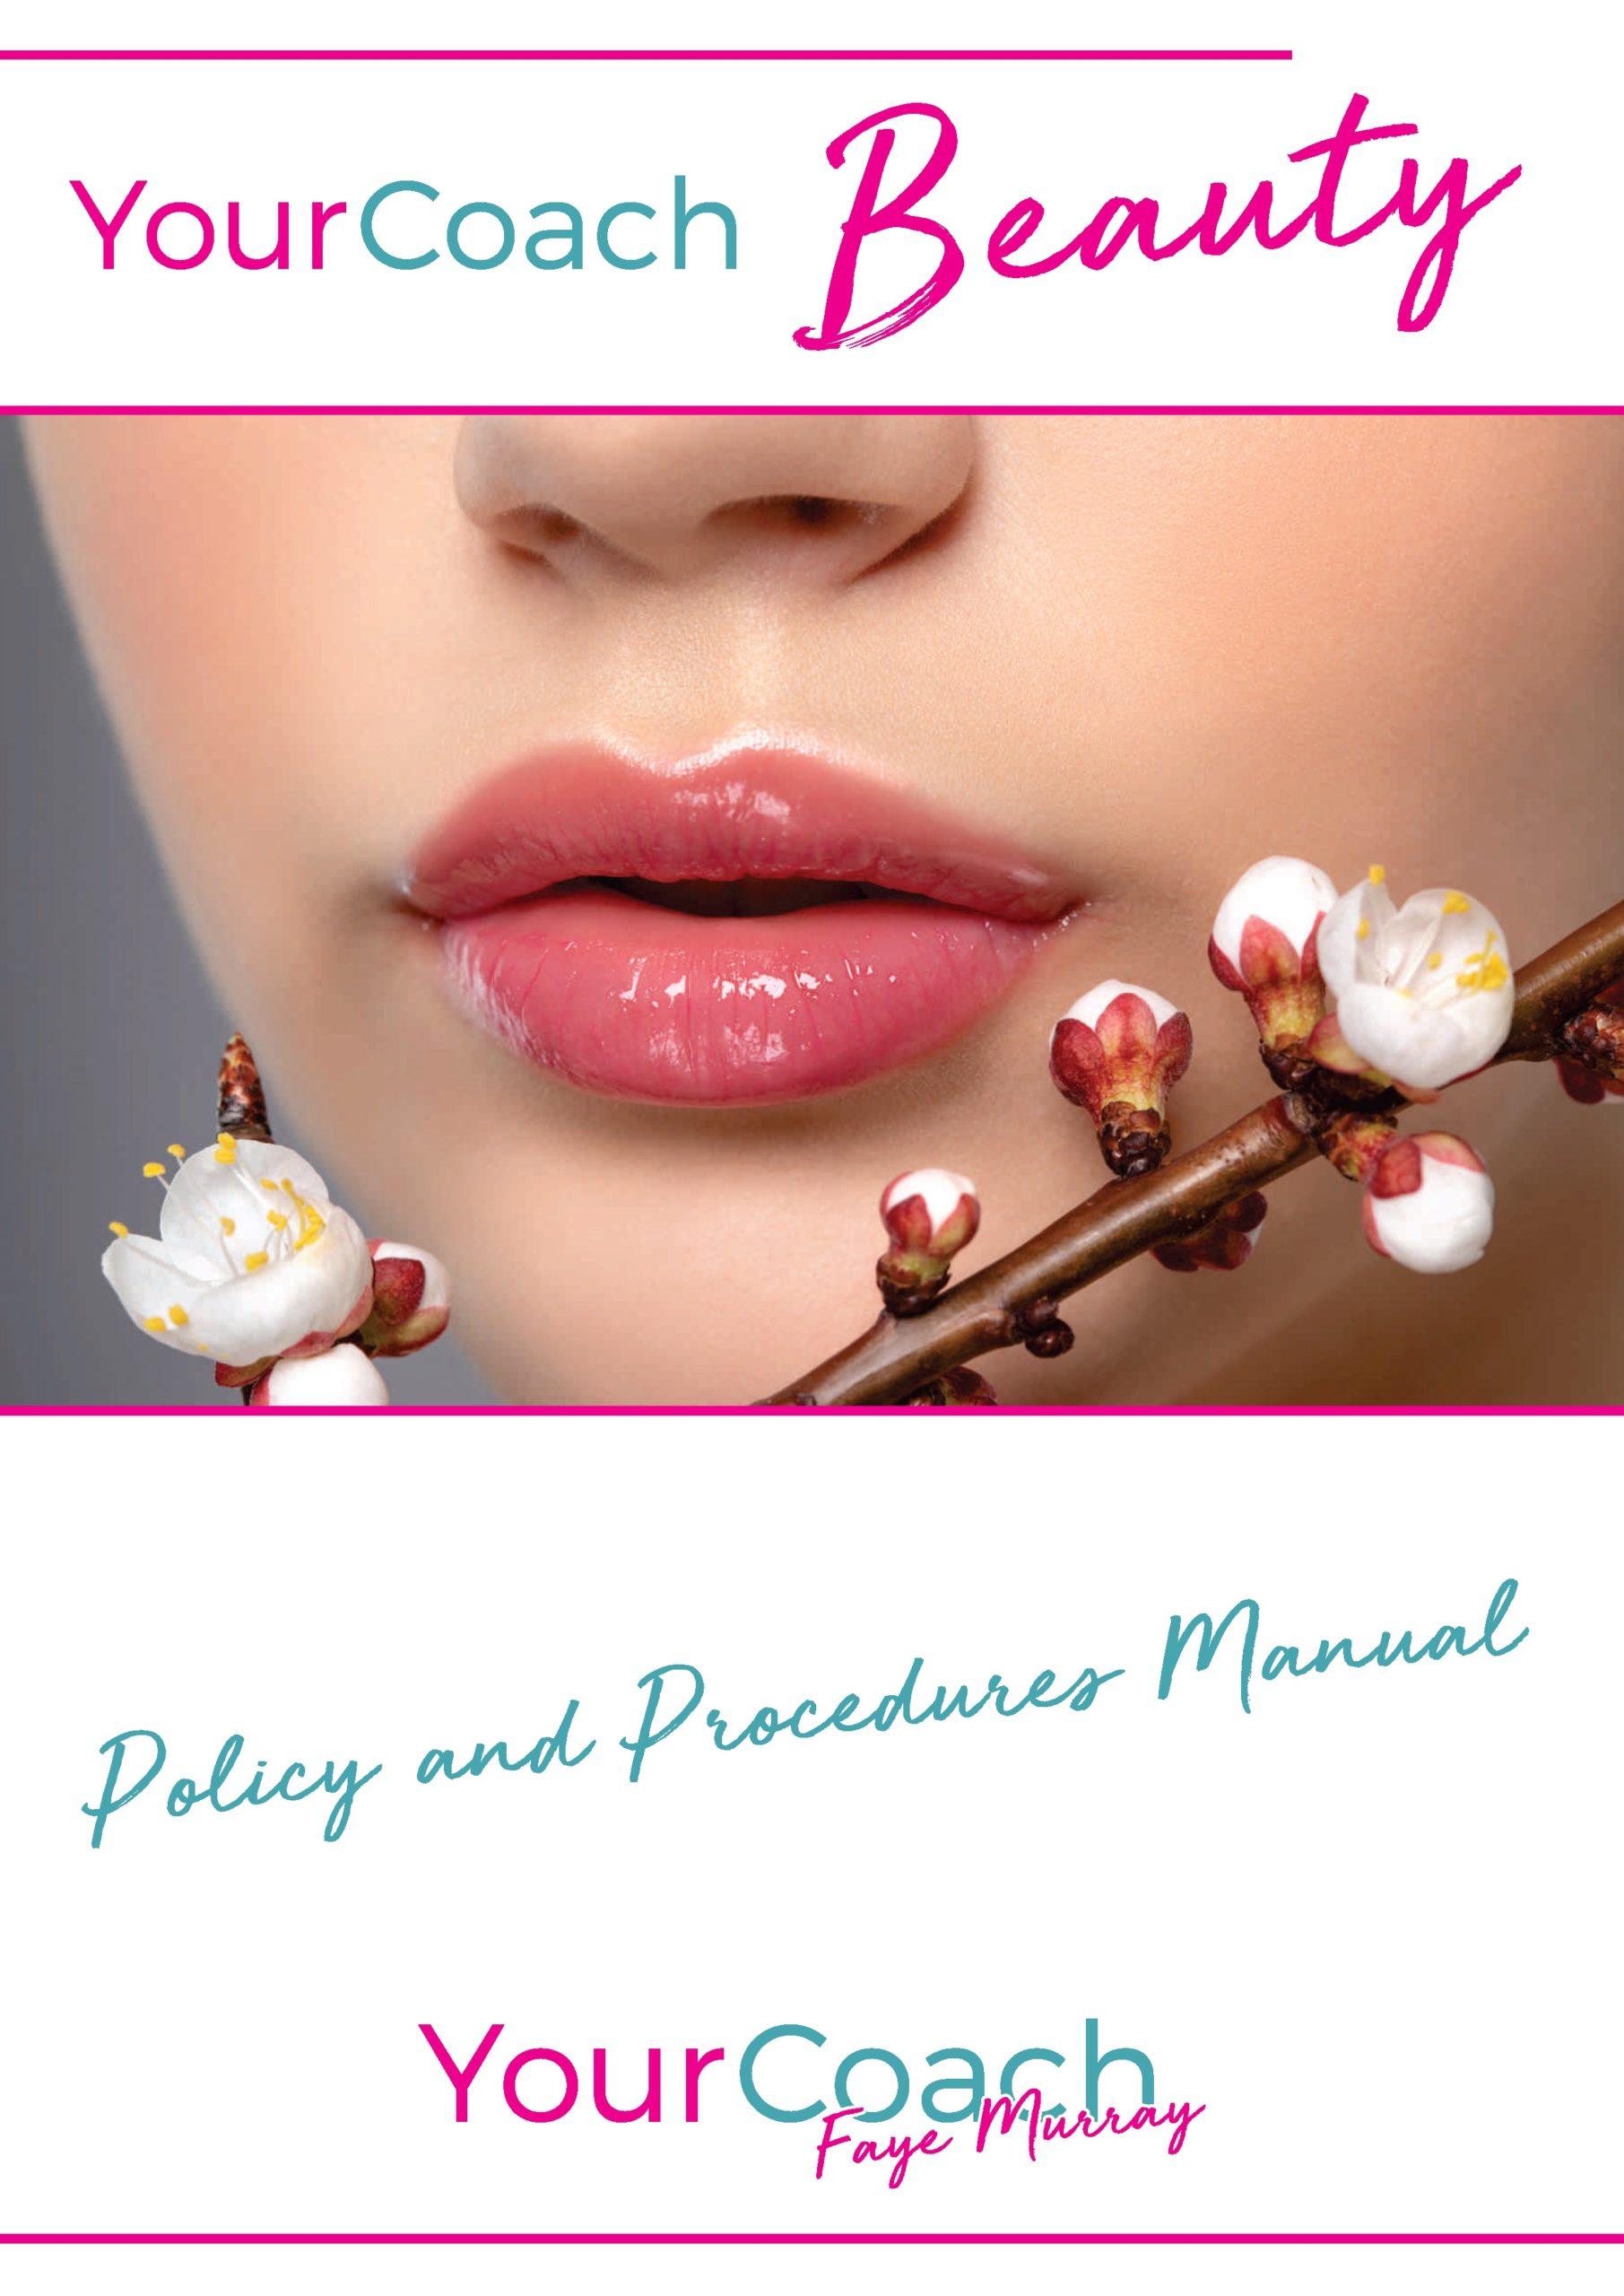 Your Coach Beauty - Policy & Procedures Manual - Faye Murray